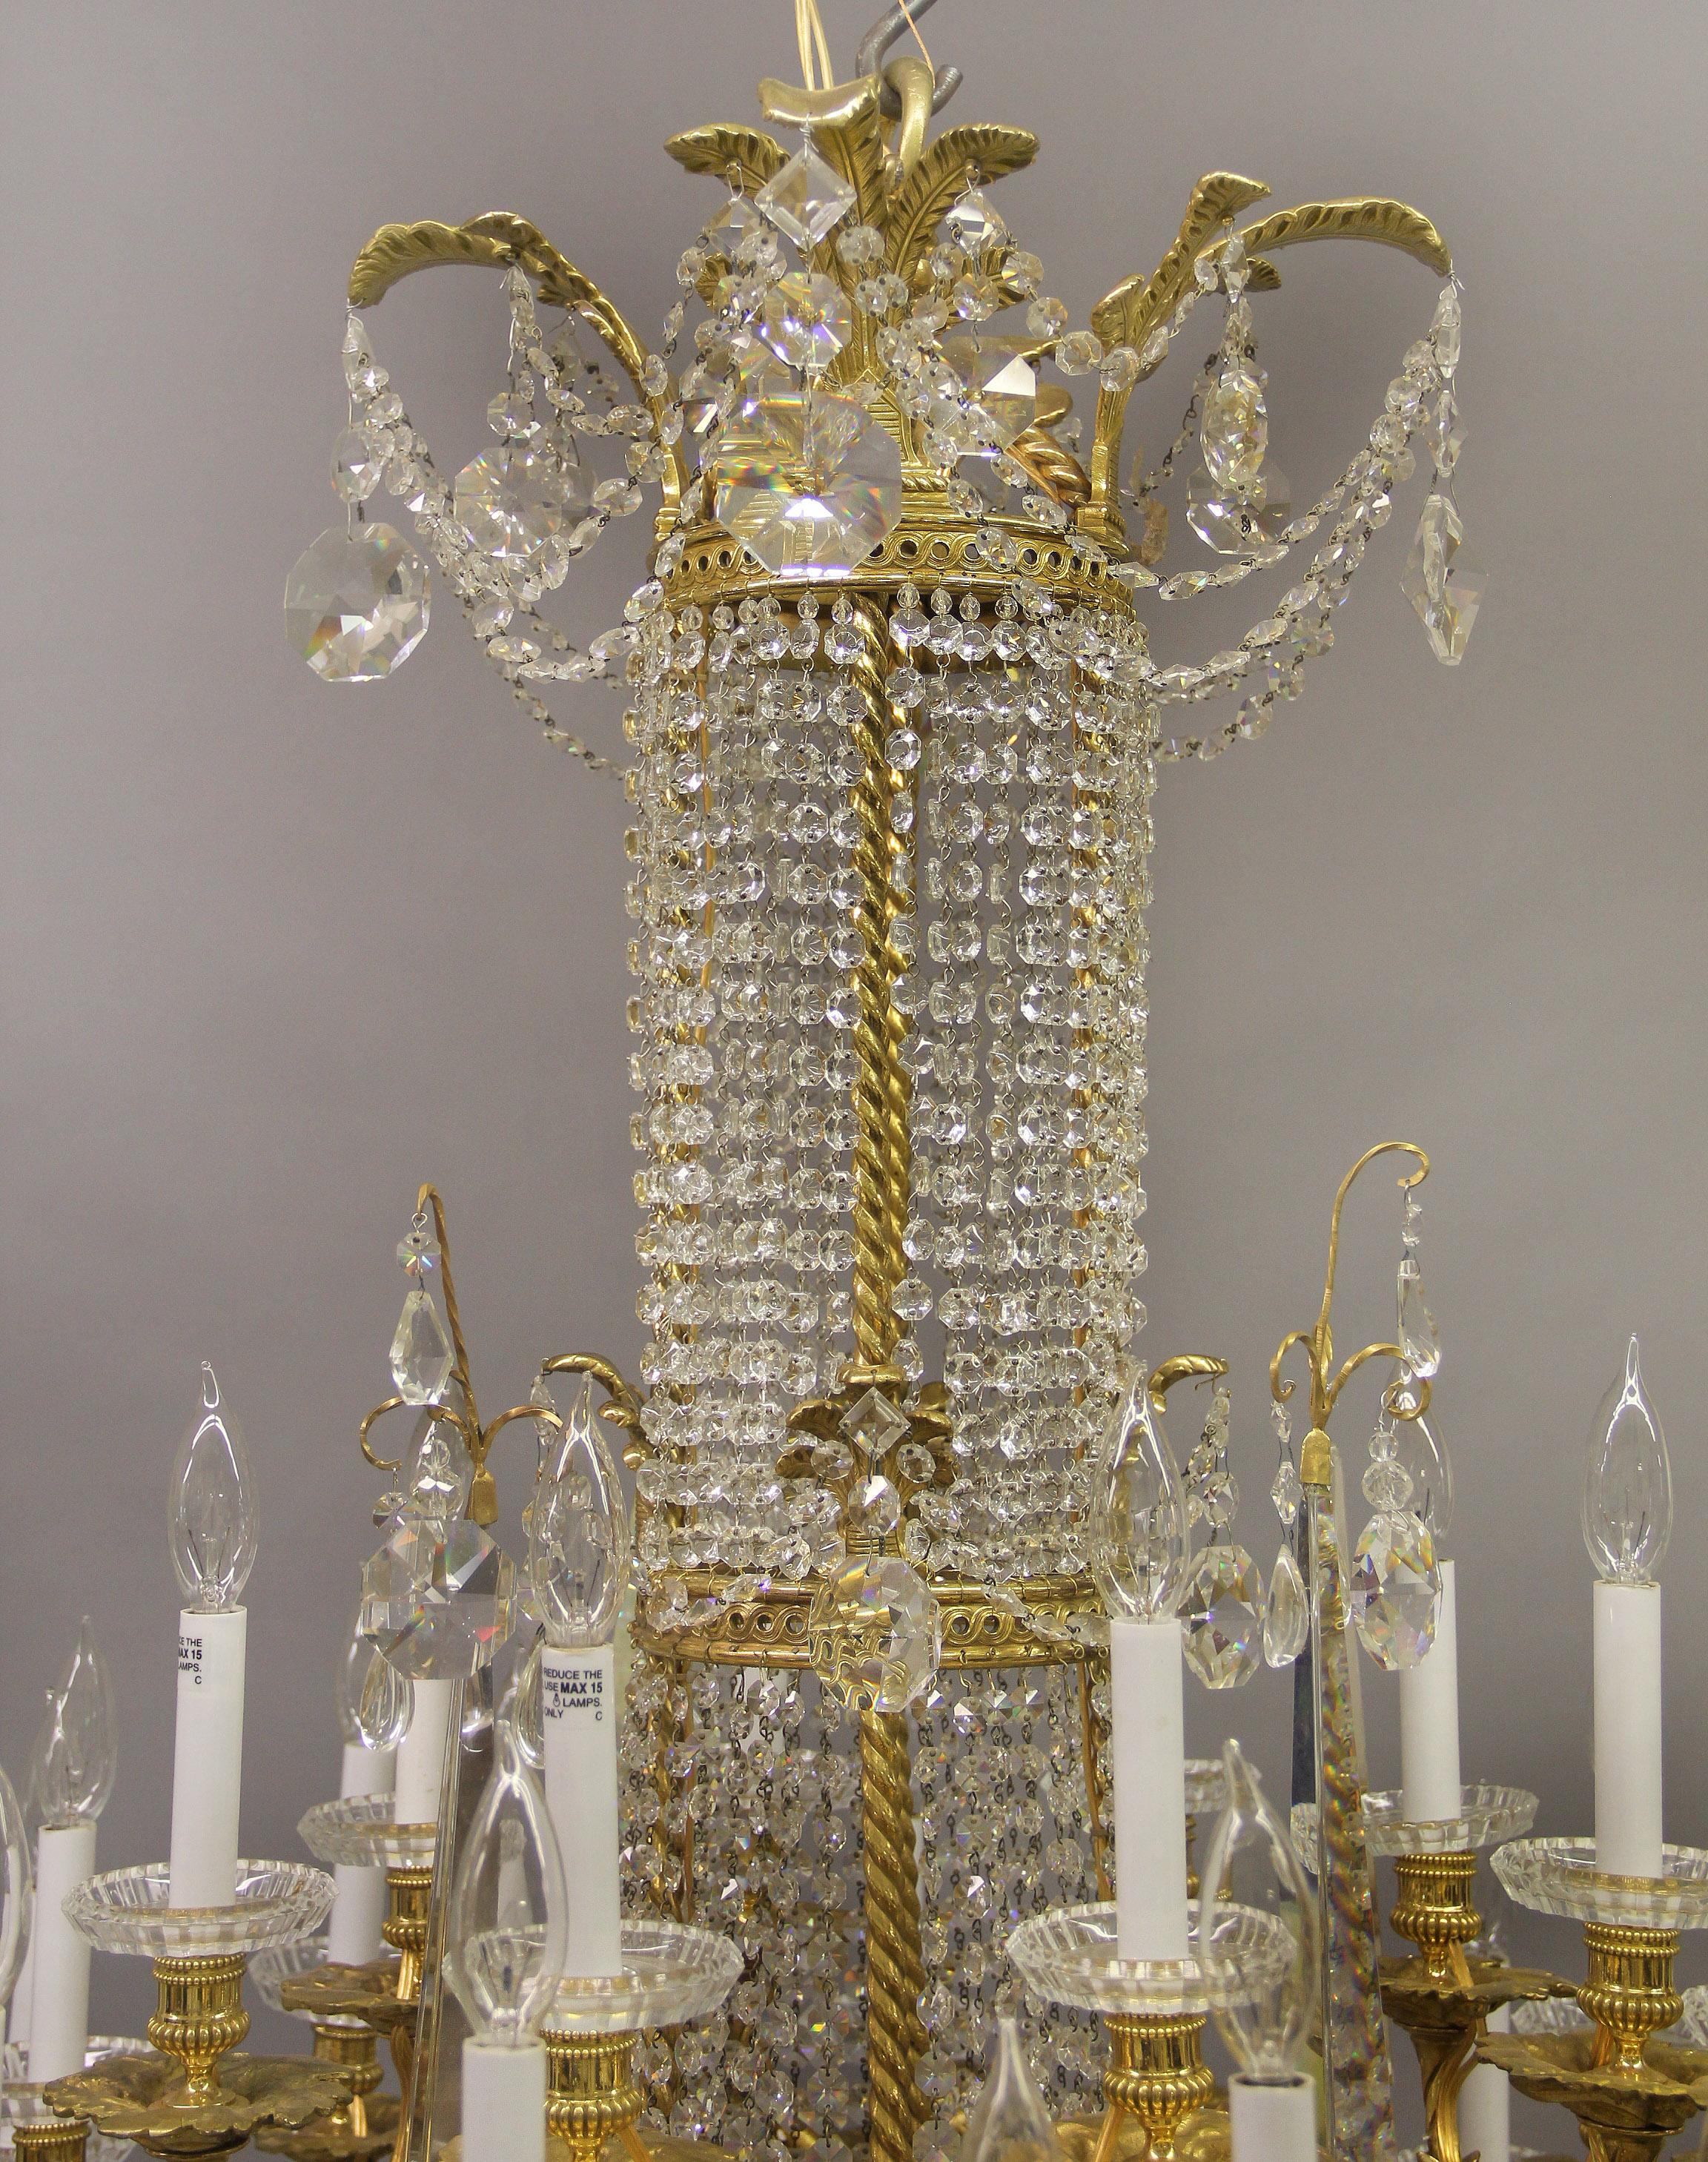 Belle Époque Exquisite Late 19th Century Gilt Bronze and Crystal Chandelier by Baccarat For Sale